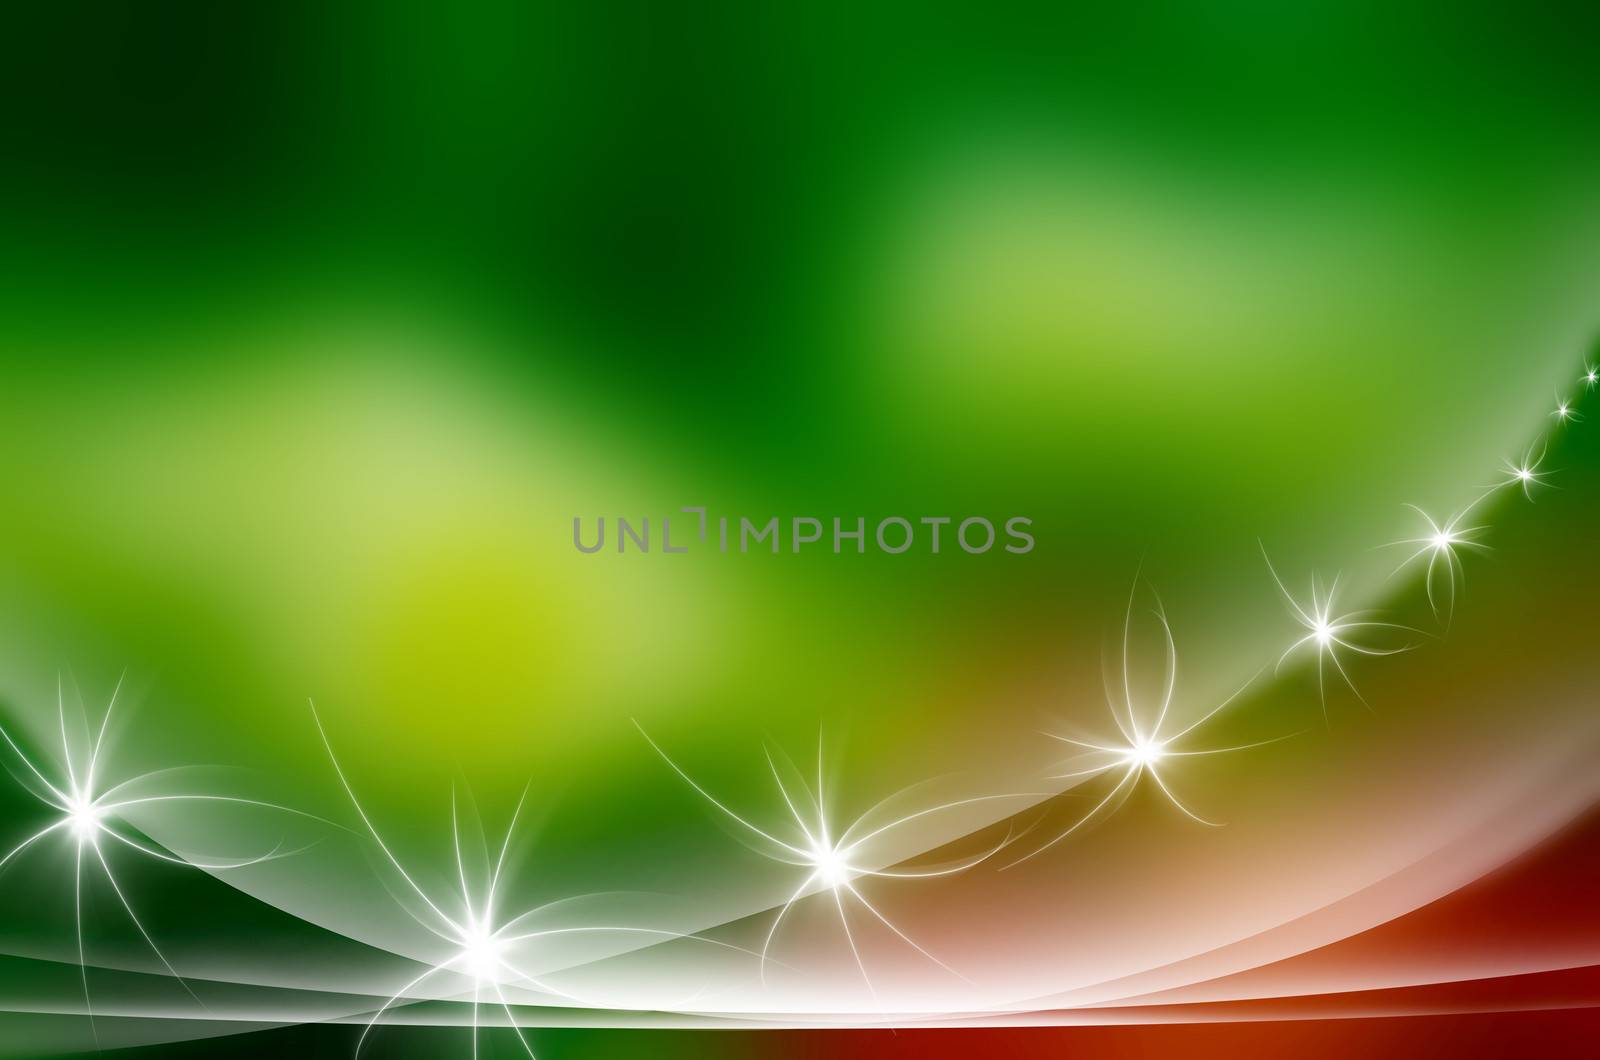 Abstract background multicolored : horizontal